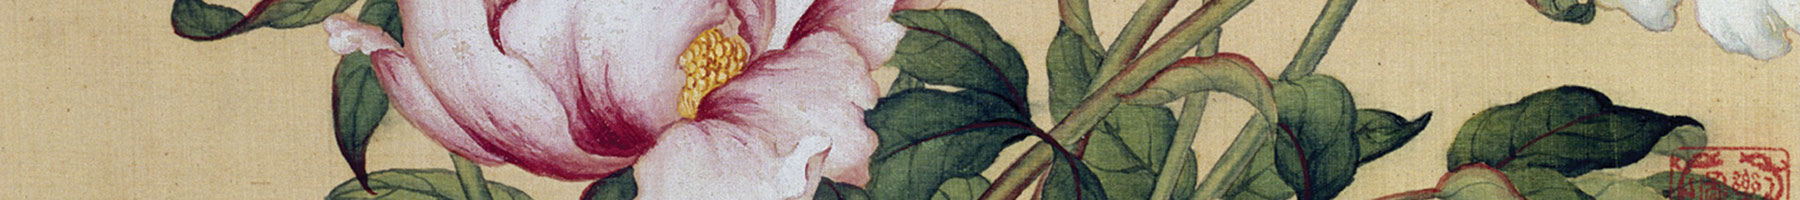 painting of a pink flower and leaves